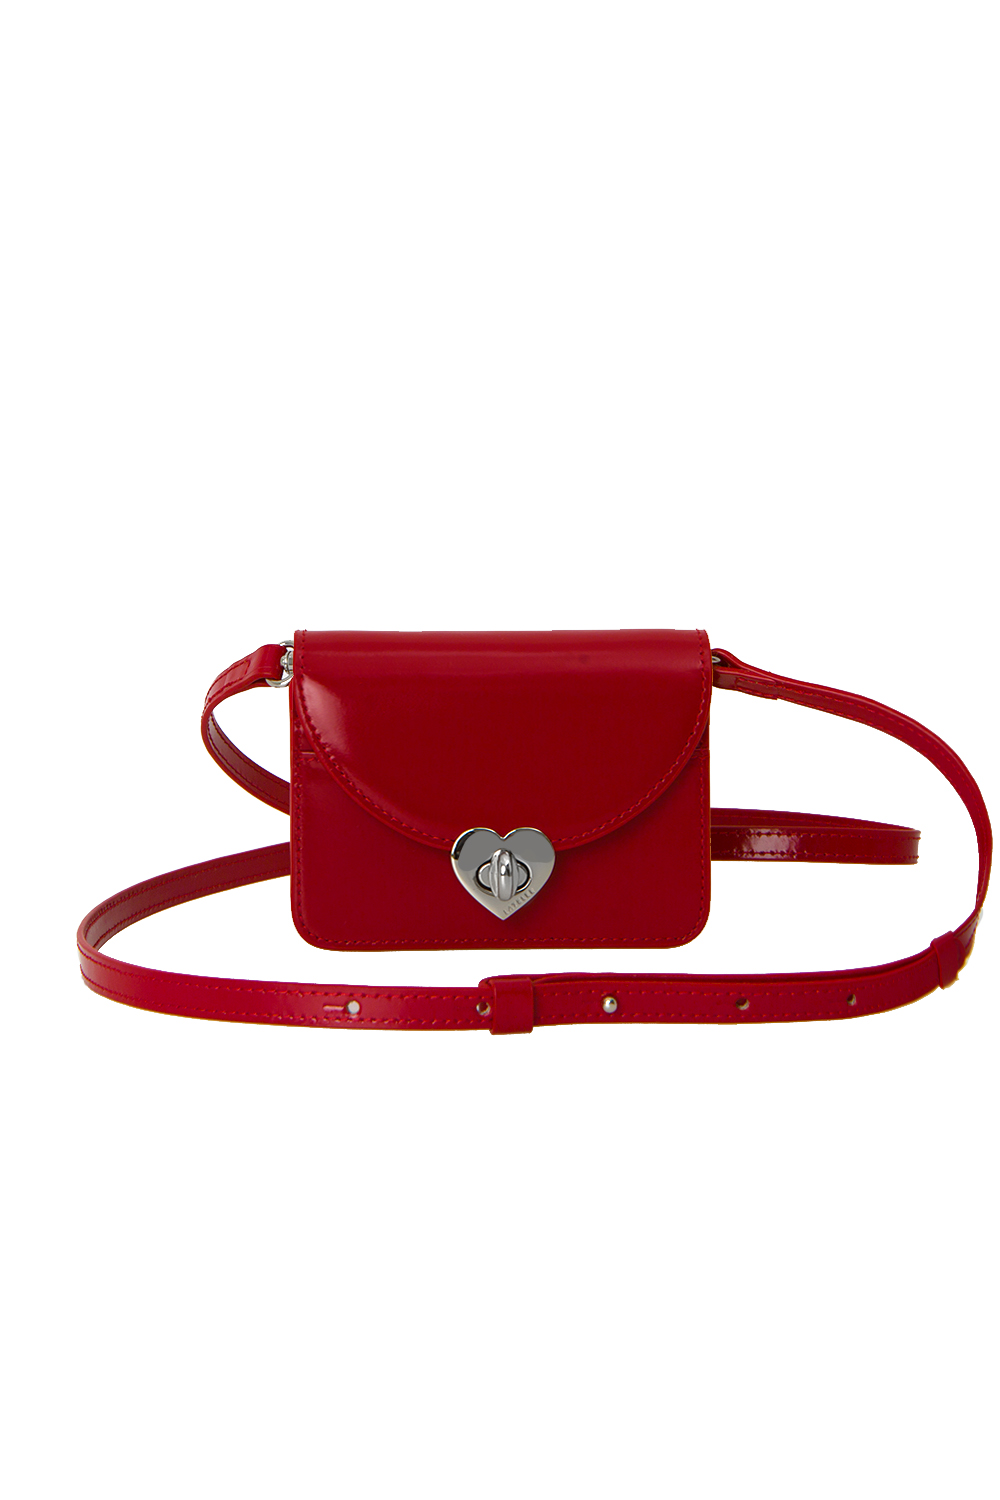 [4th PRE-ORDER]HEART CARD BAG / Cherry Red